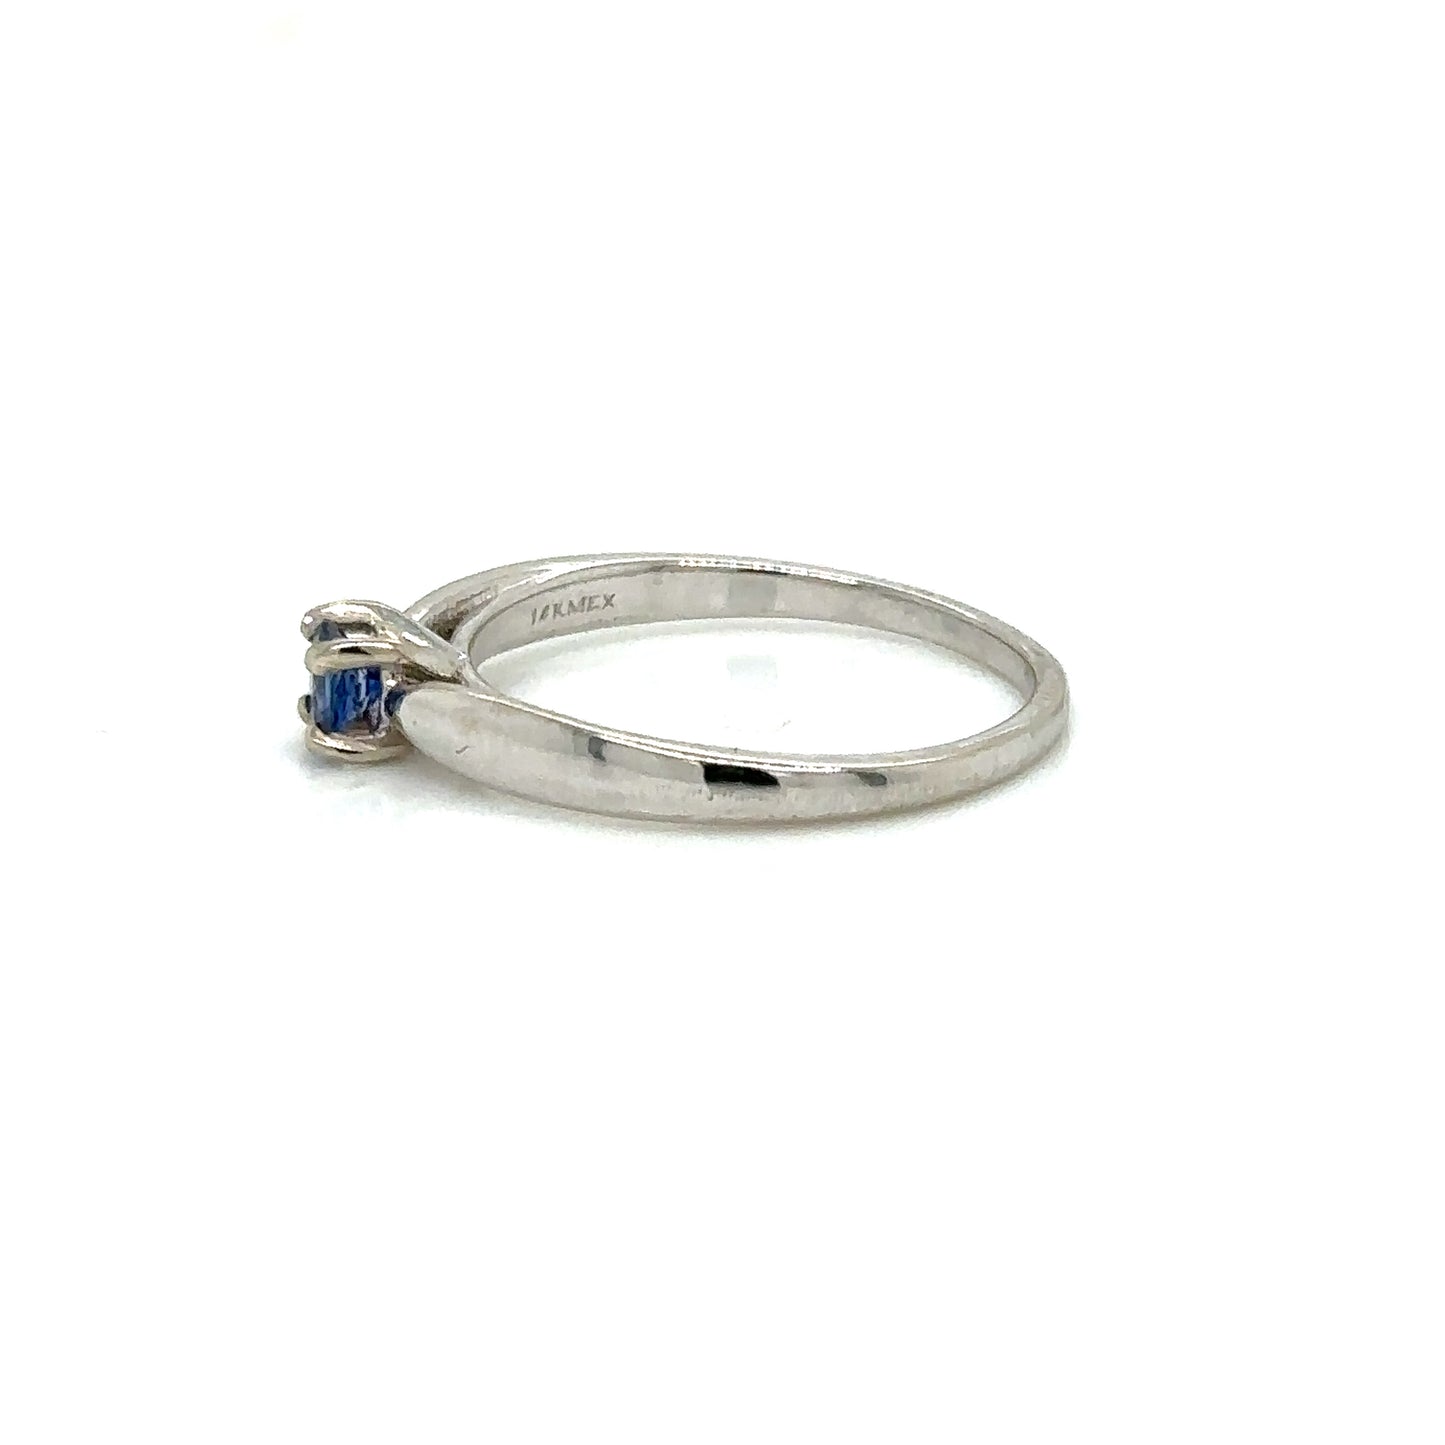 IMMEDIATE DELIVERY / Sapphire Solitaire Ring / 14k white gold / Size 6